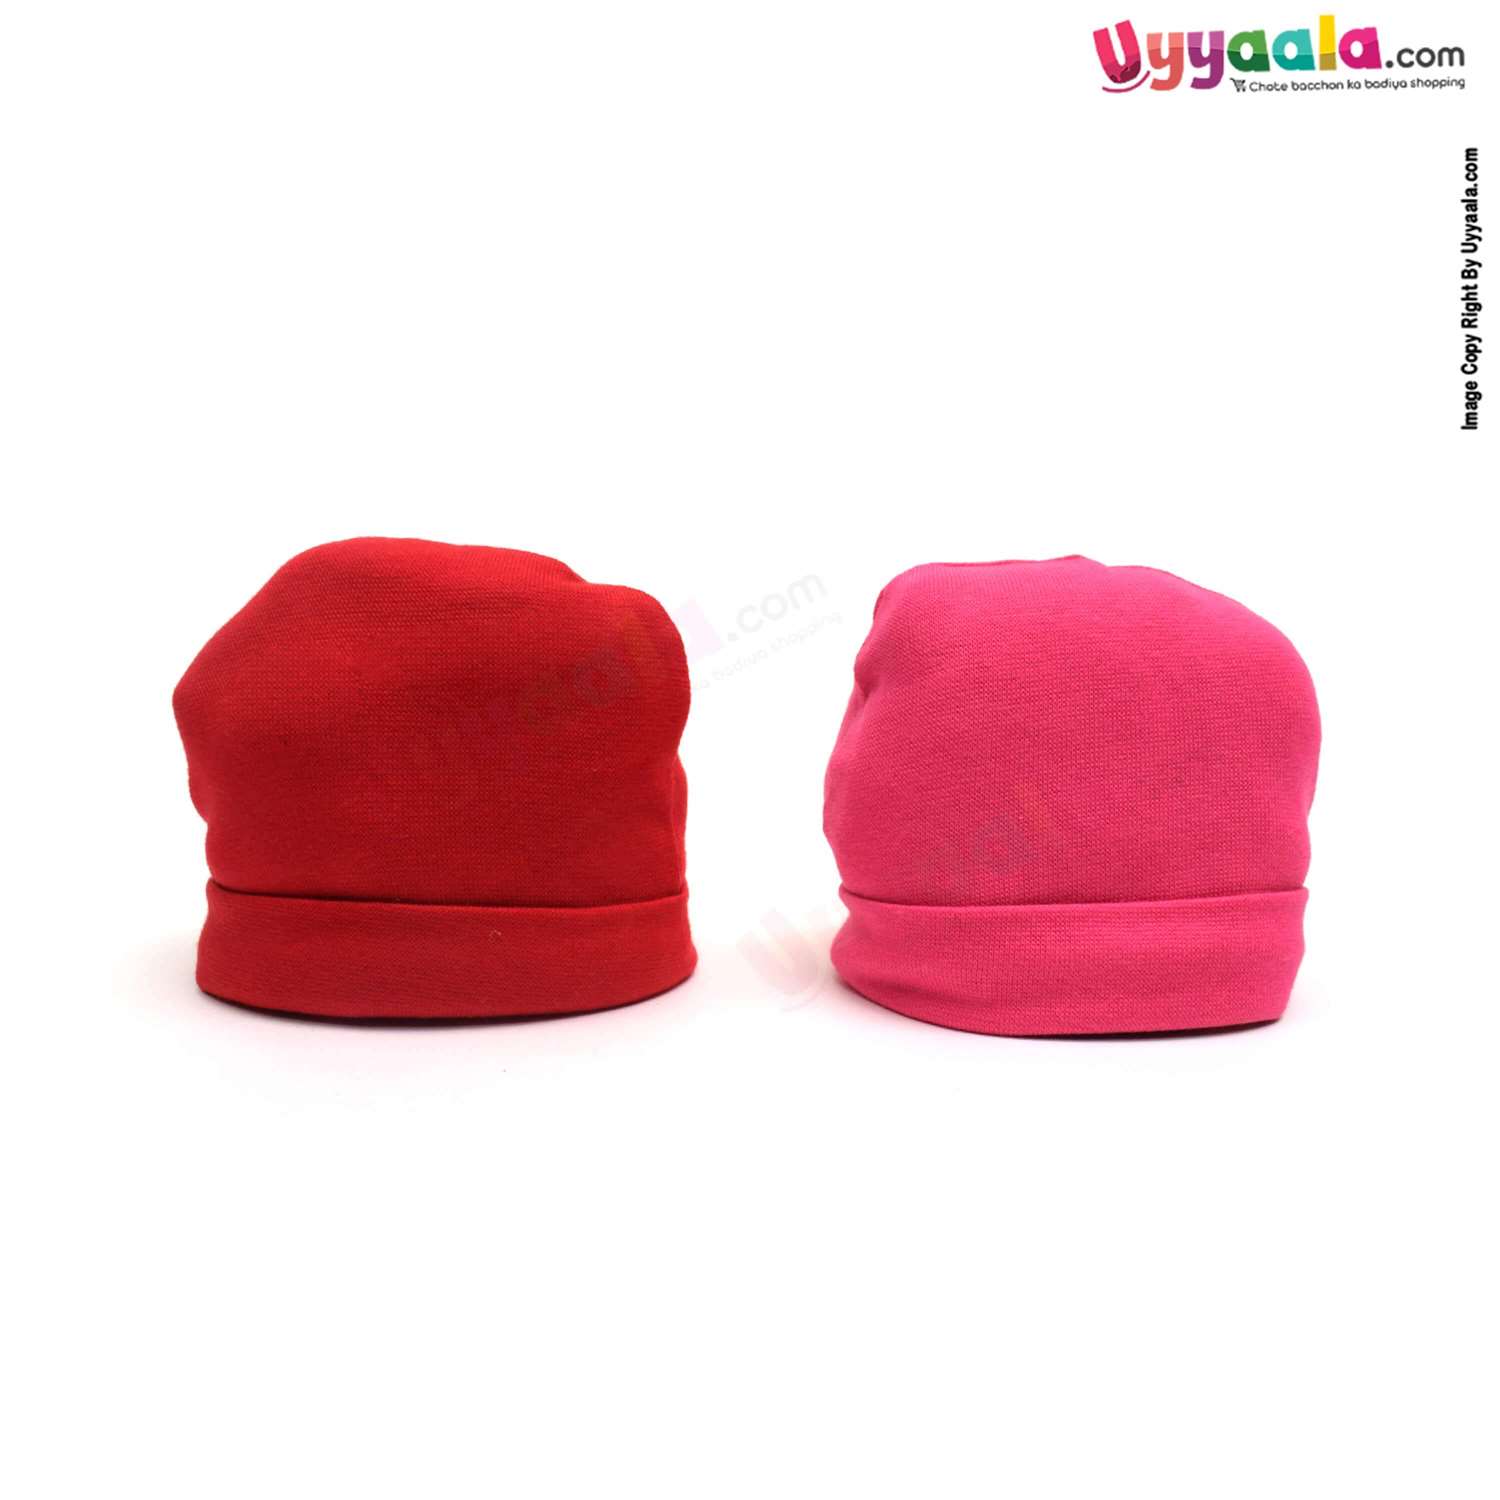 Round Soft Hosiery Cotton Caps for Babies Pack of 2, 0-3m - Red & Pink